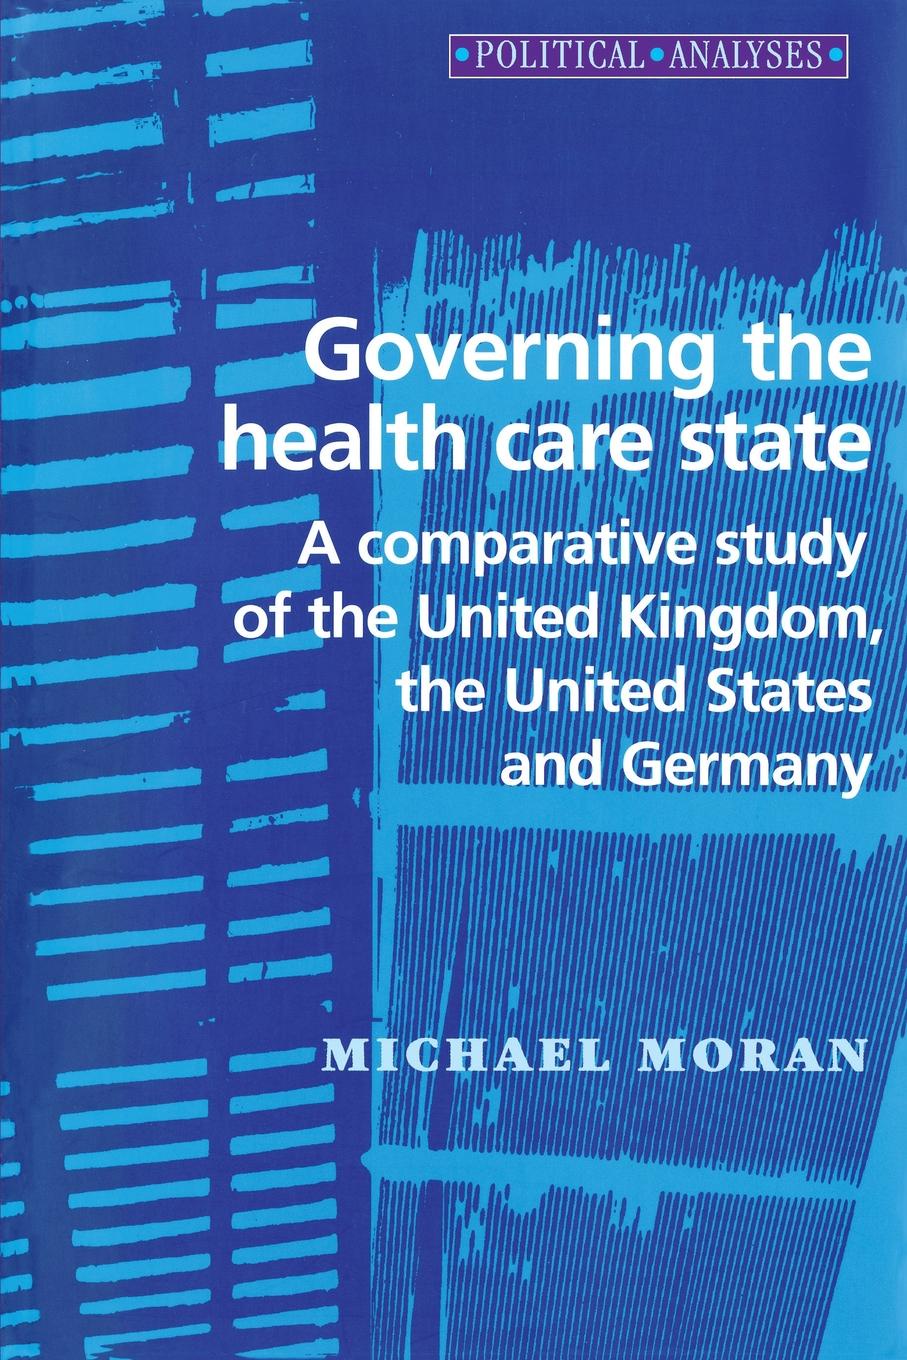 Governing the Health Care State. A Comparative Study of the United Kingdom, the United States and Germany